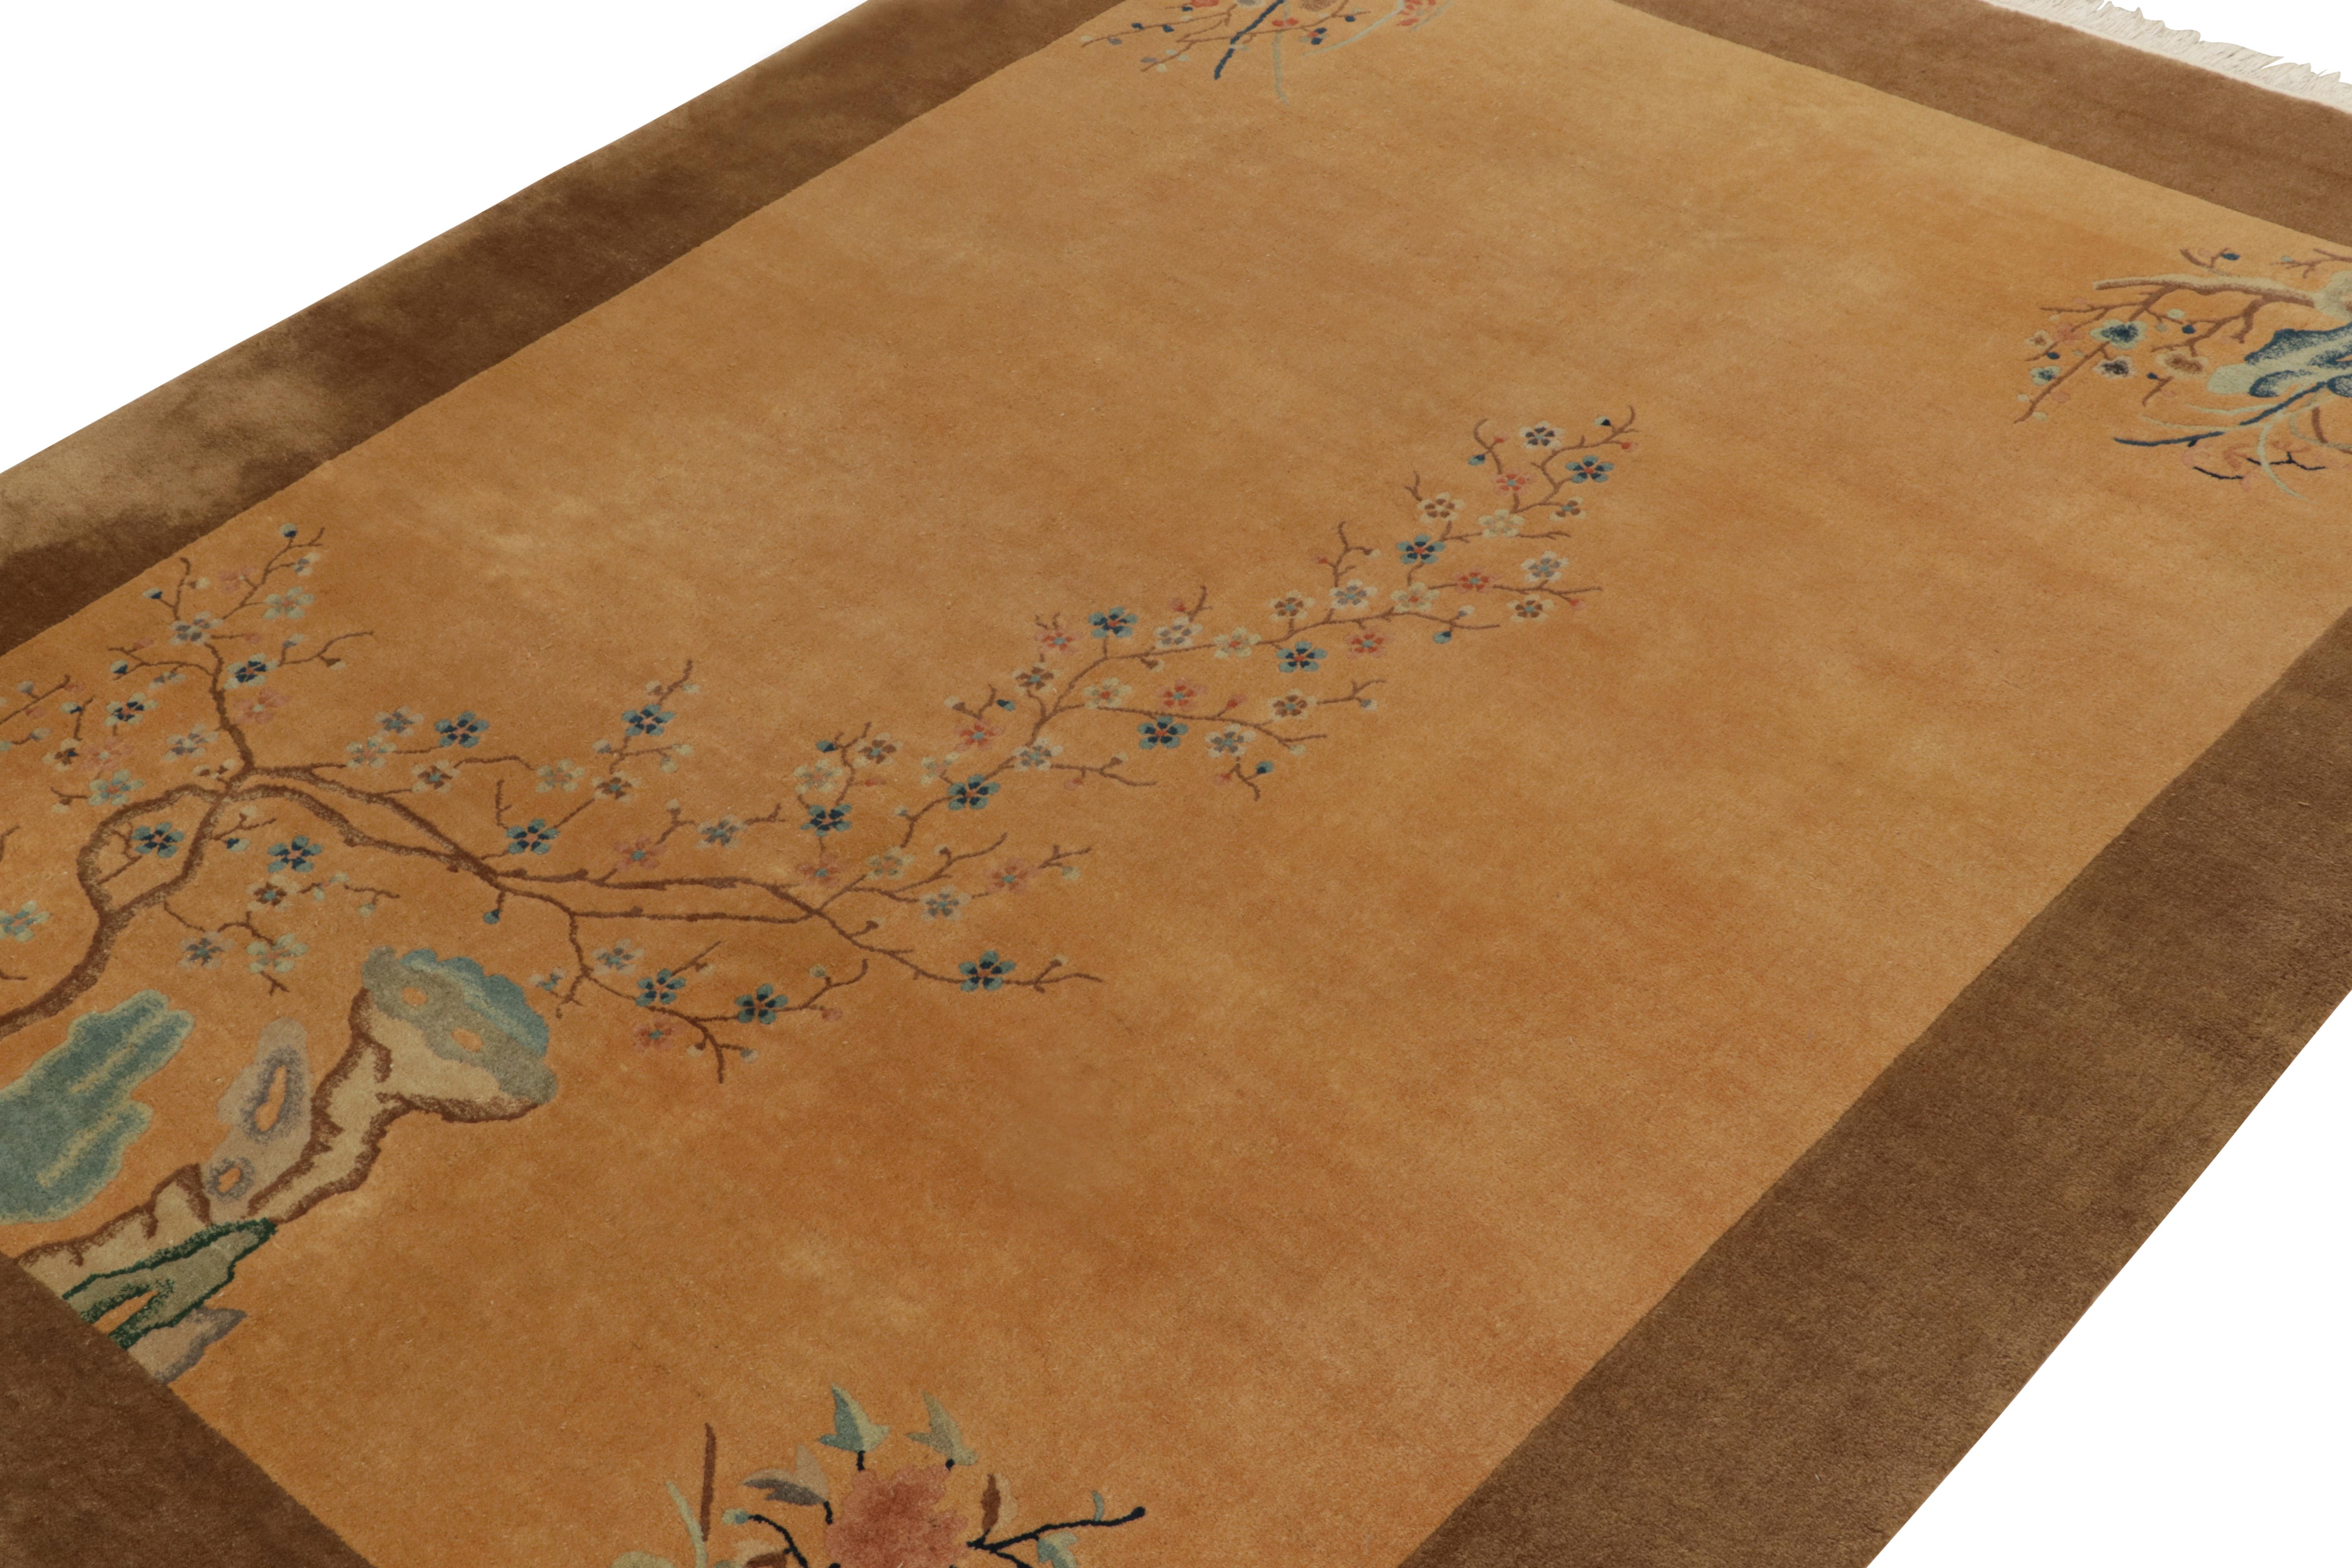 Antique Chinese Art Deco Rug in Gold, Beige-Brown & Blue Floral Patterns In Good Condition For Sale In Long Island City, NY